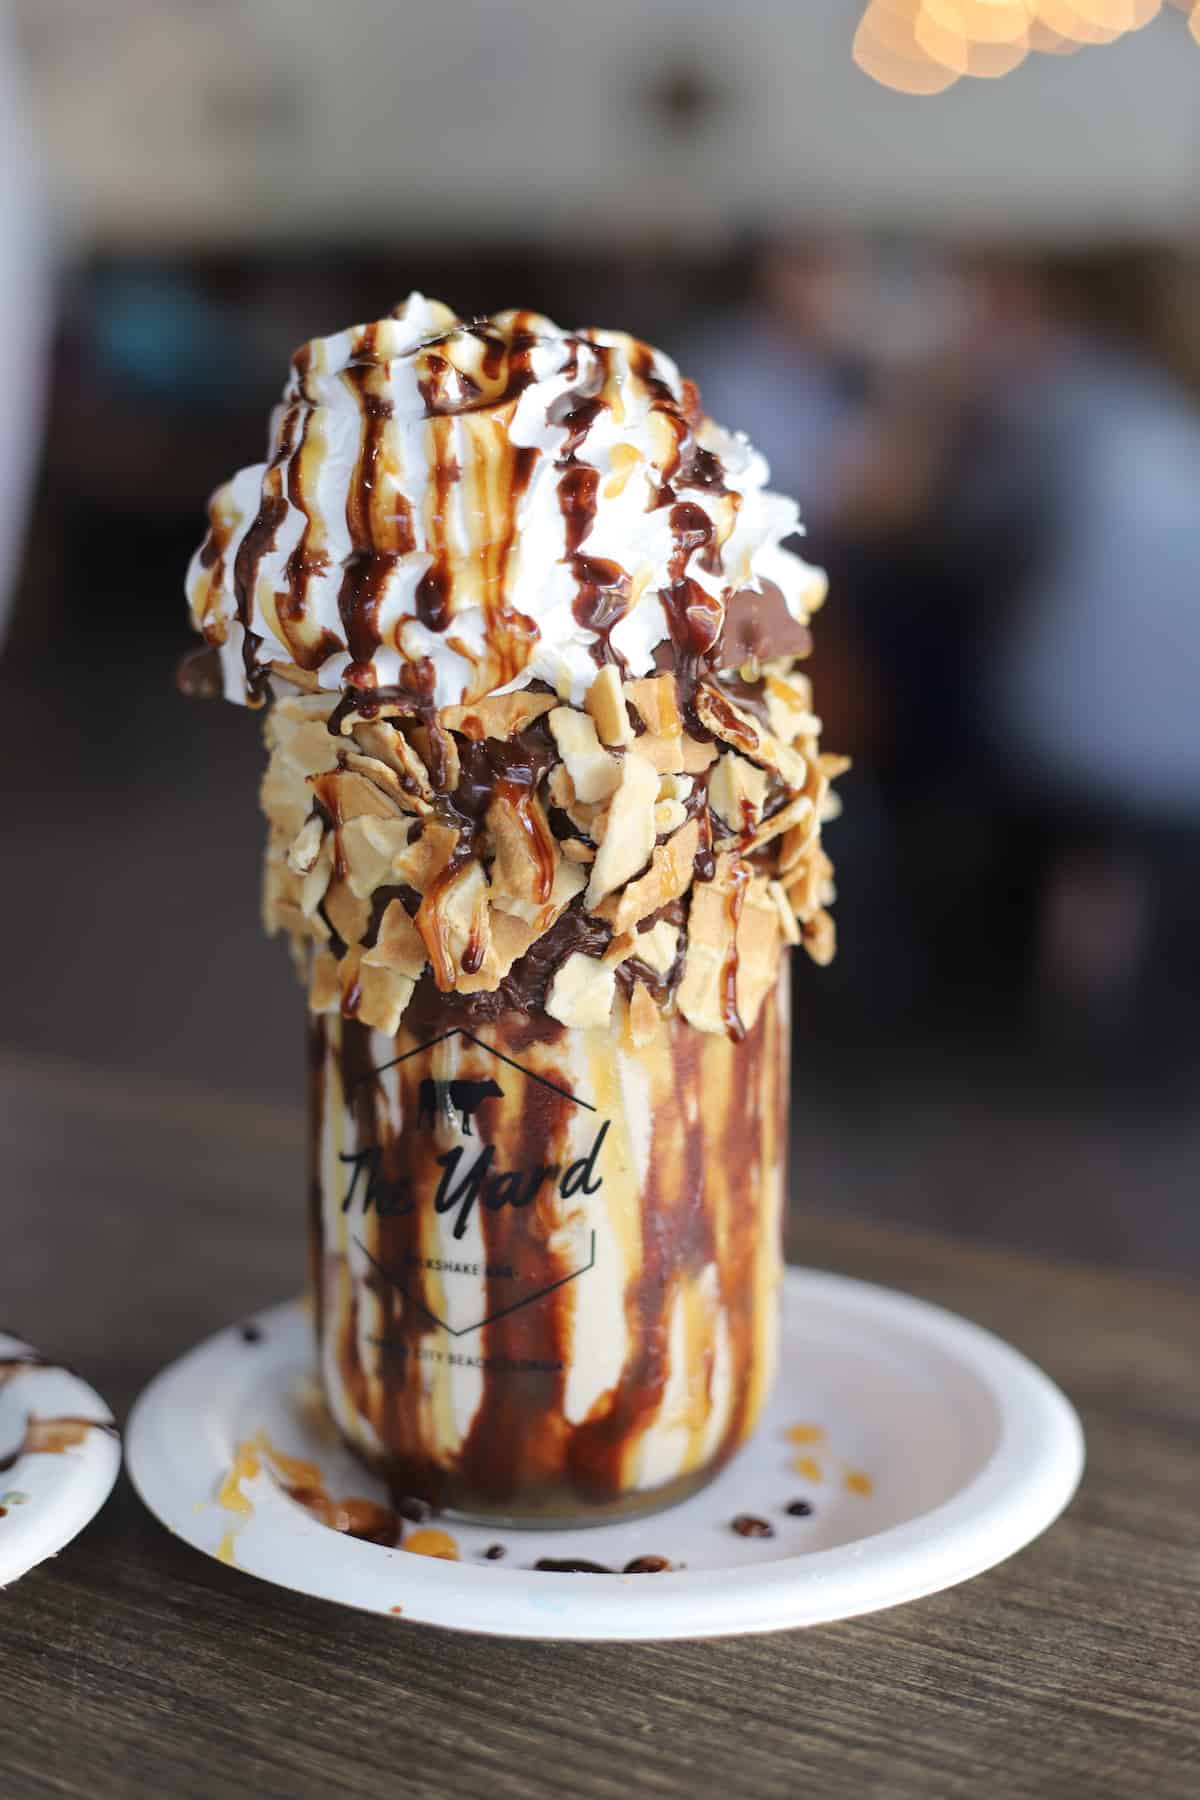 Milkshake in a mason jar with whipped cream,, chocolate sauce, and nuts on a white plate.
